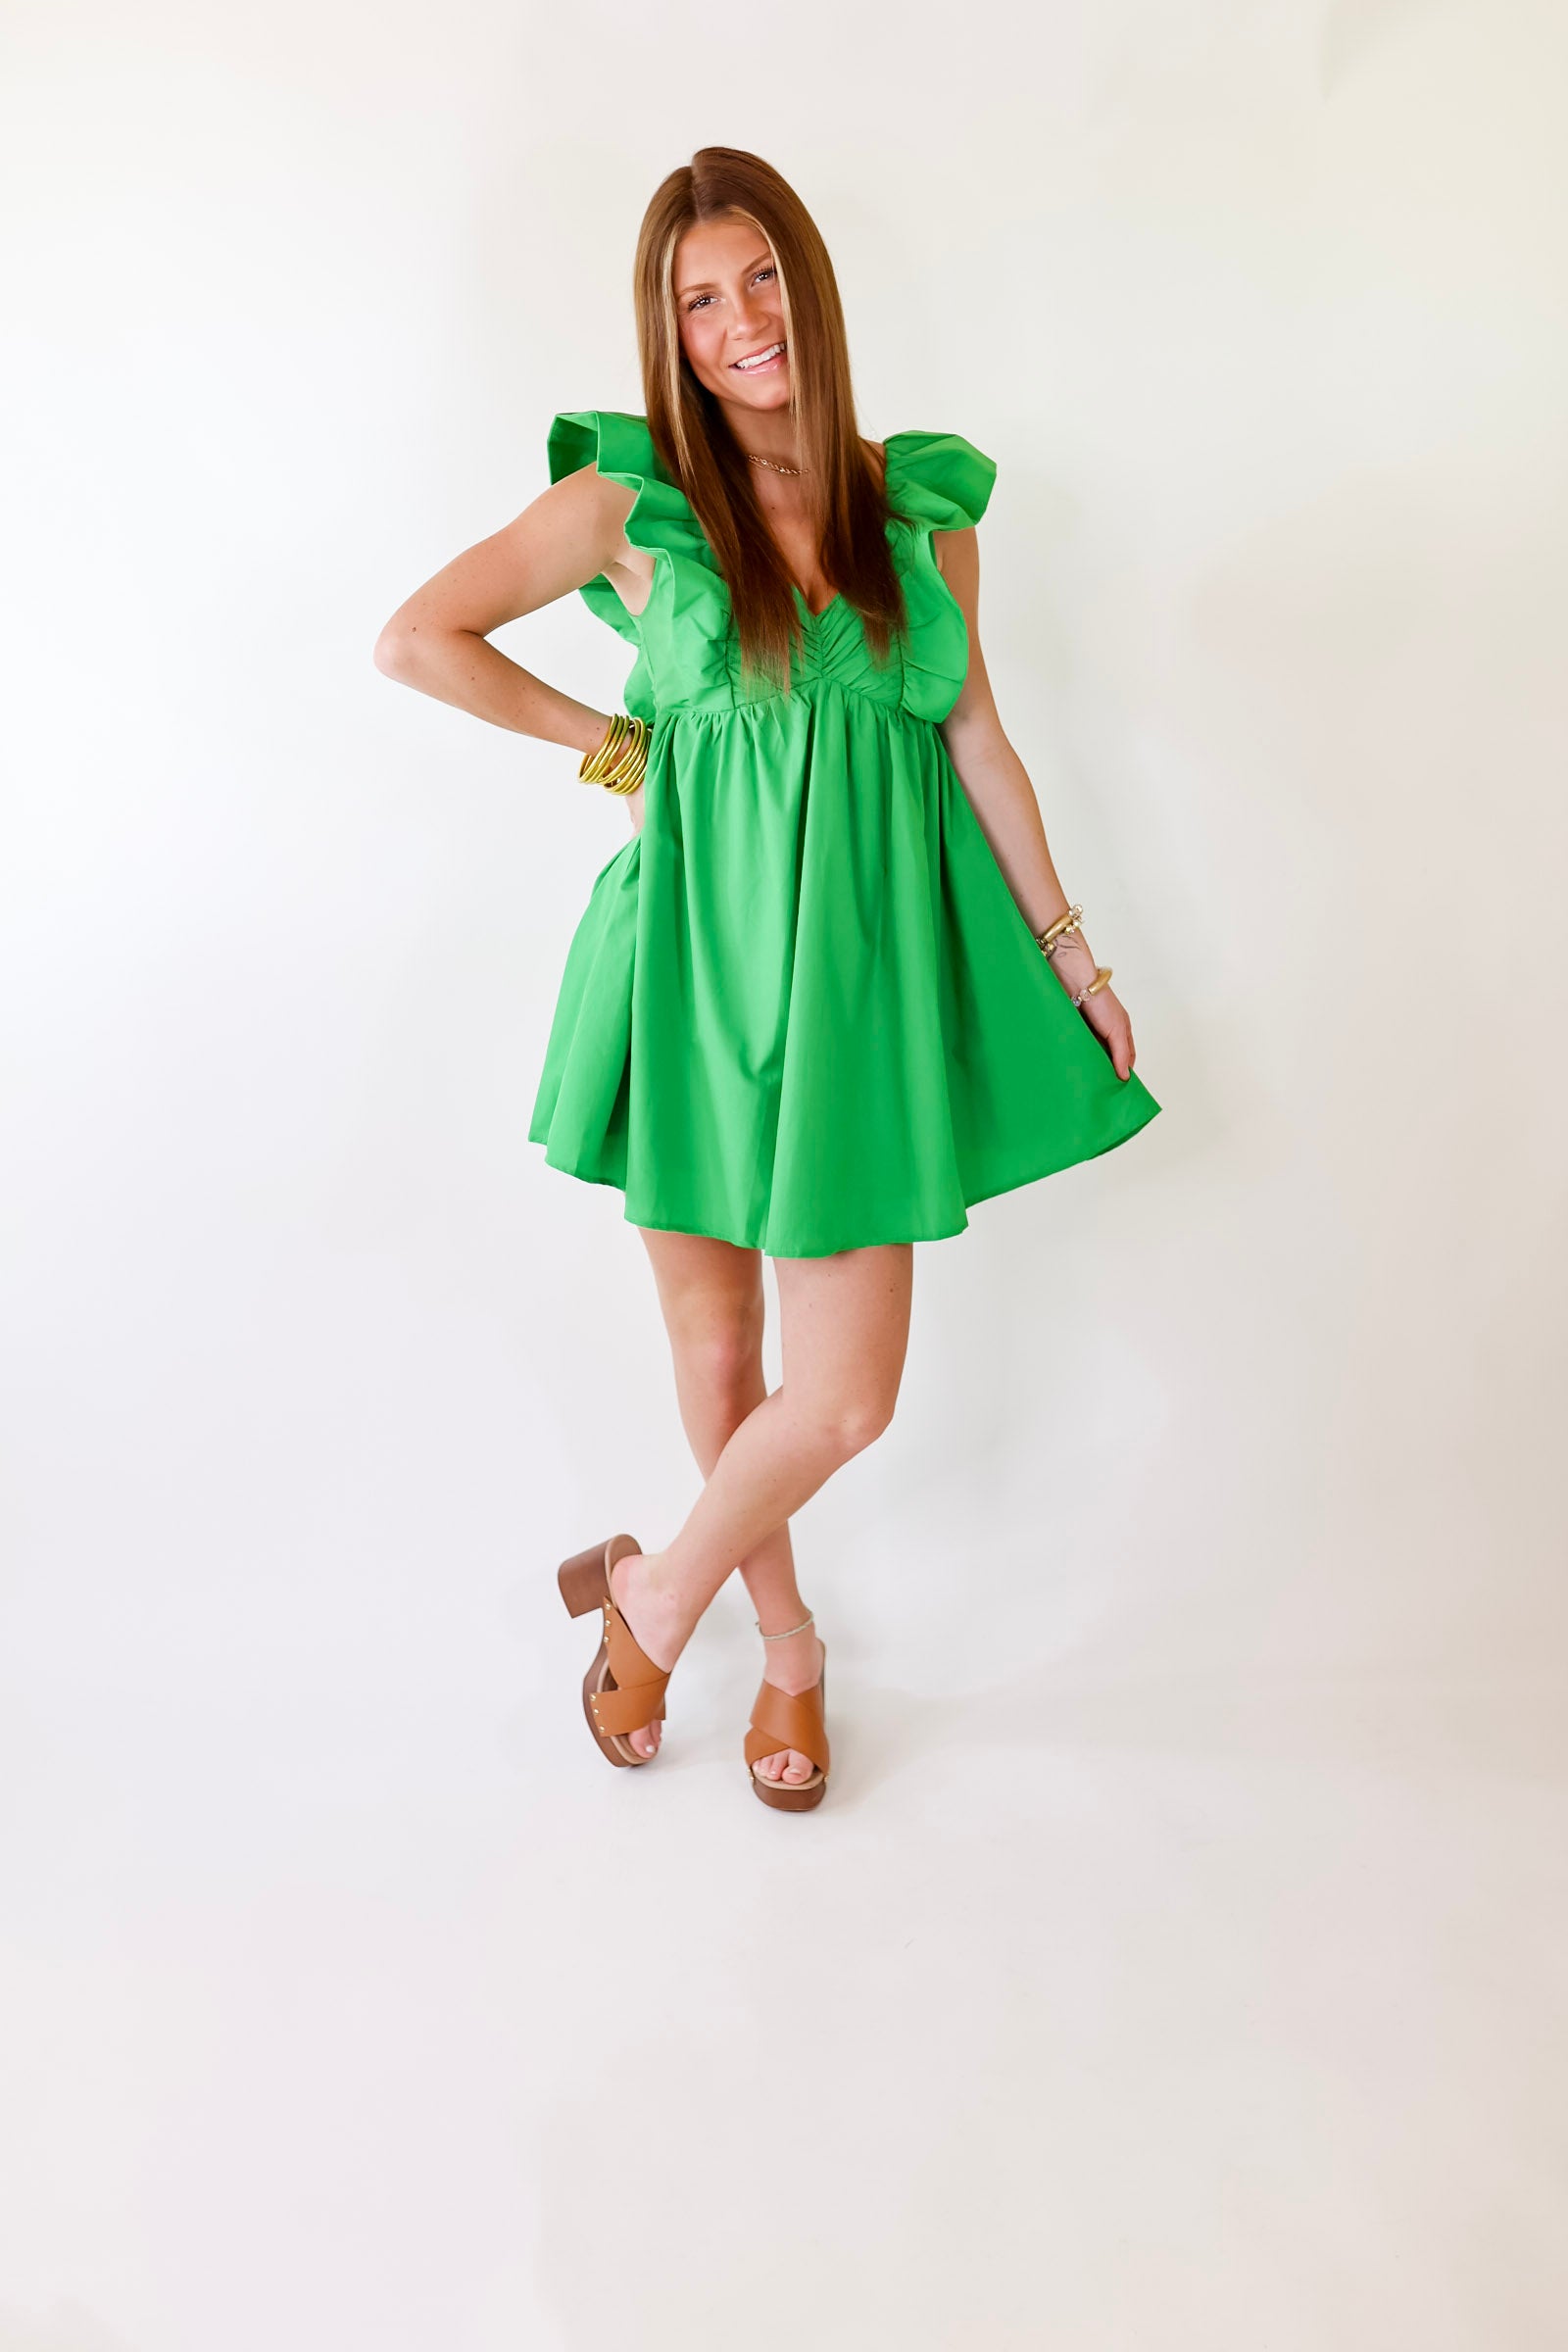 Pixie Perfect Ruffled Sleeve V Neck Dress in Green - Giddy Up Glamour Boutique